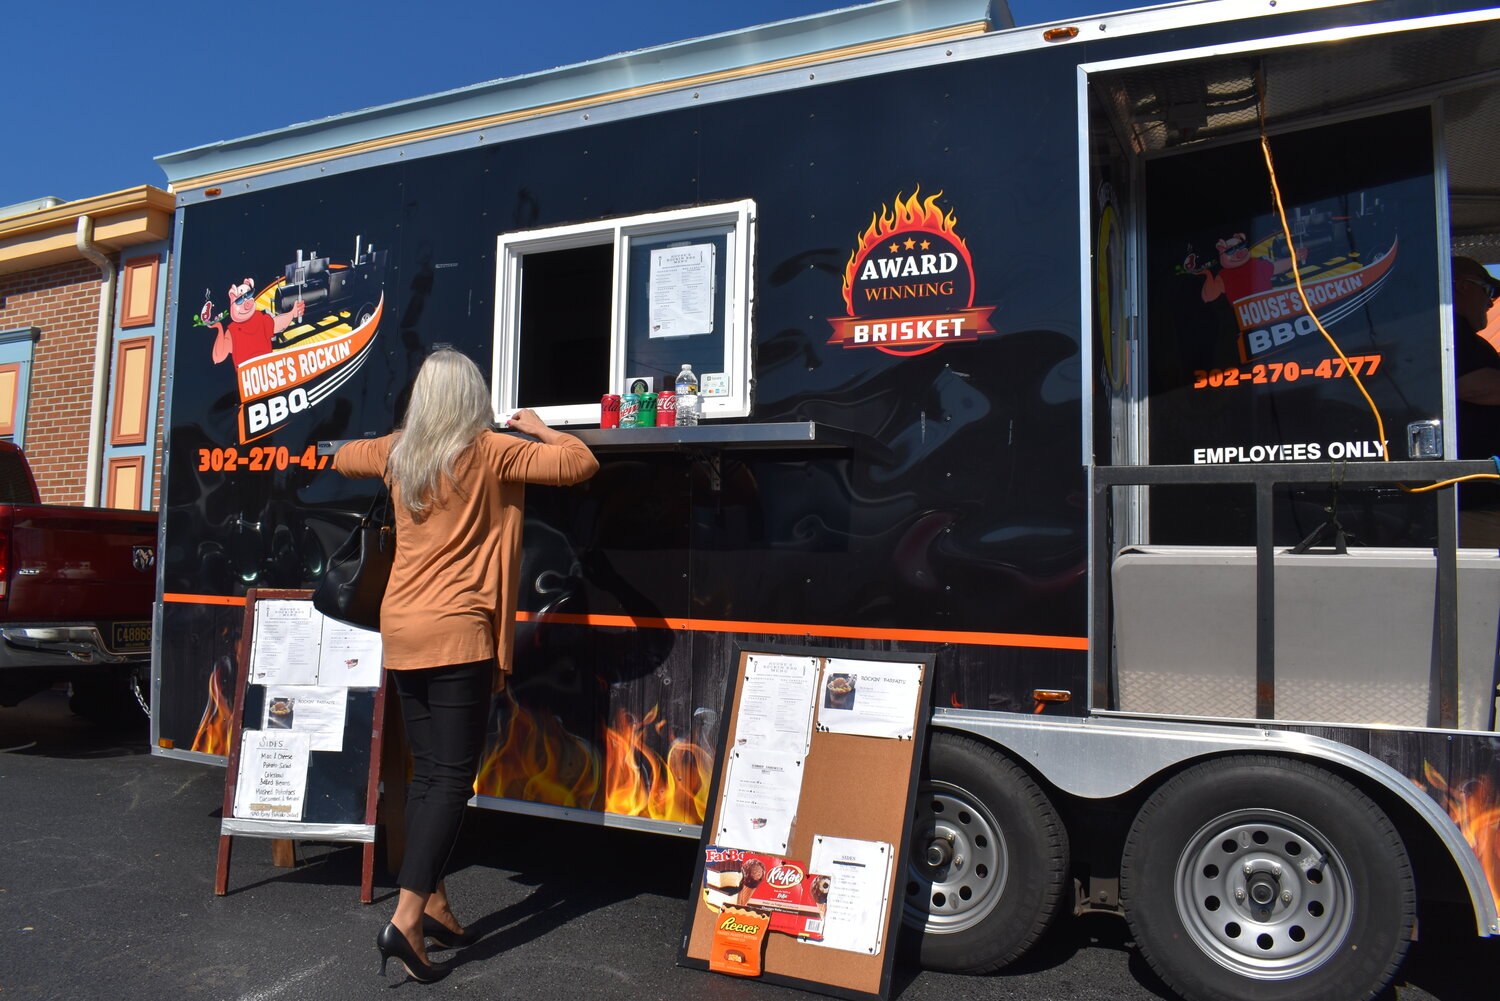 House's Rockin' BBQ barbecue trailer (food truck) at Thrive Milford 2023, hosted by the State News at Milford Senior Center.